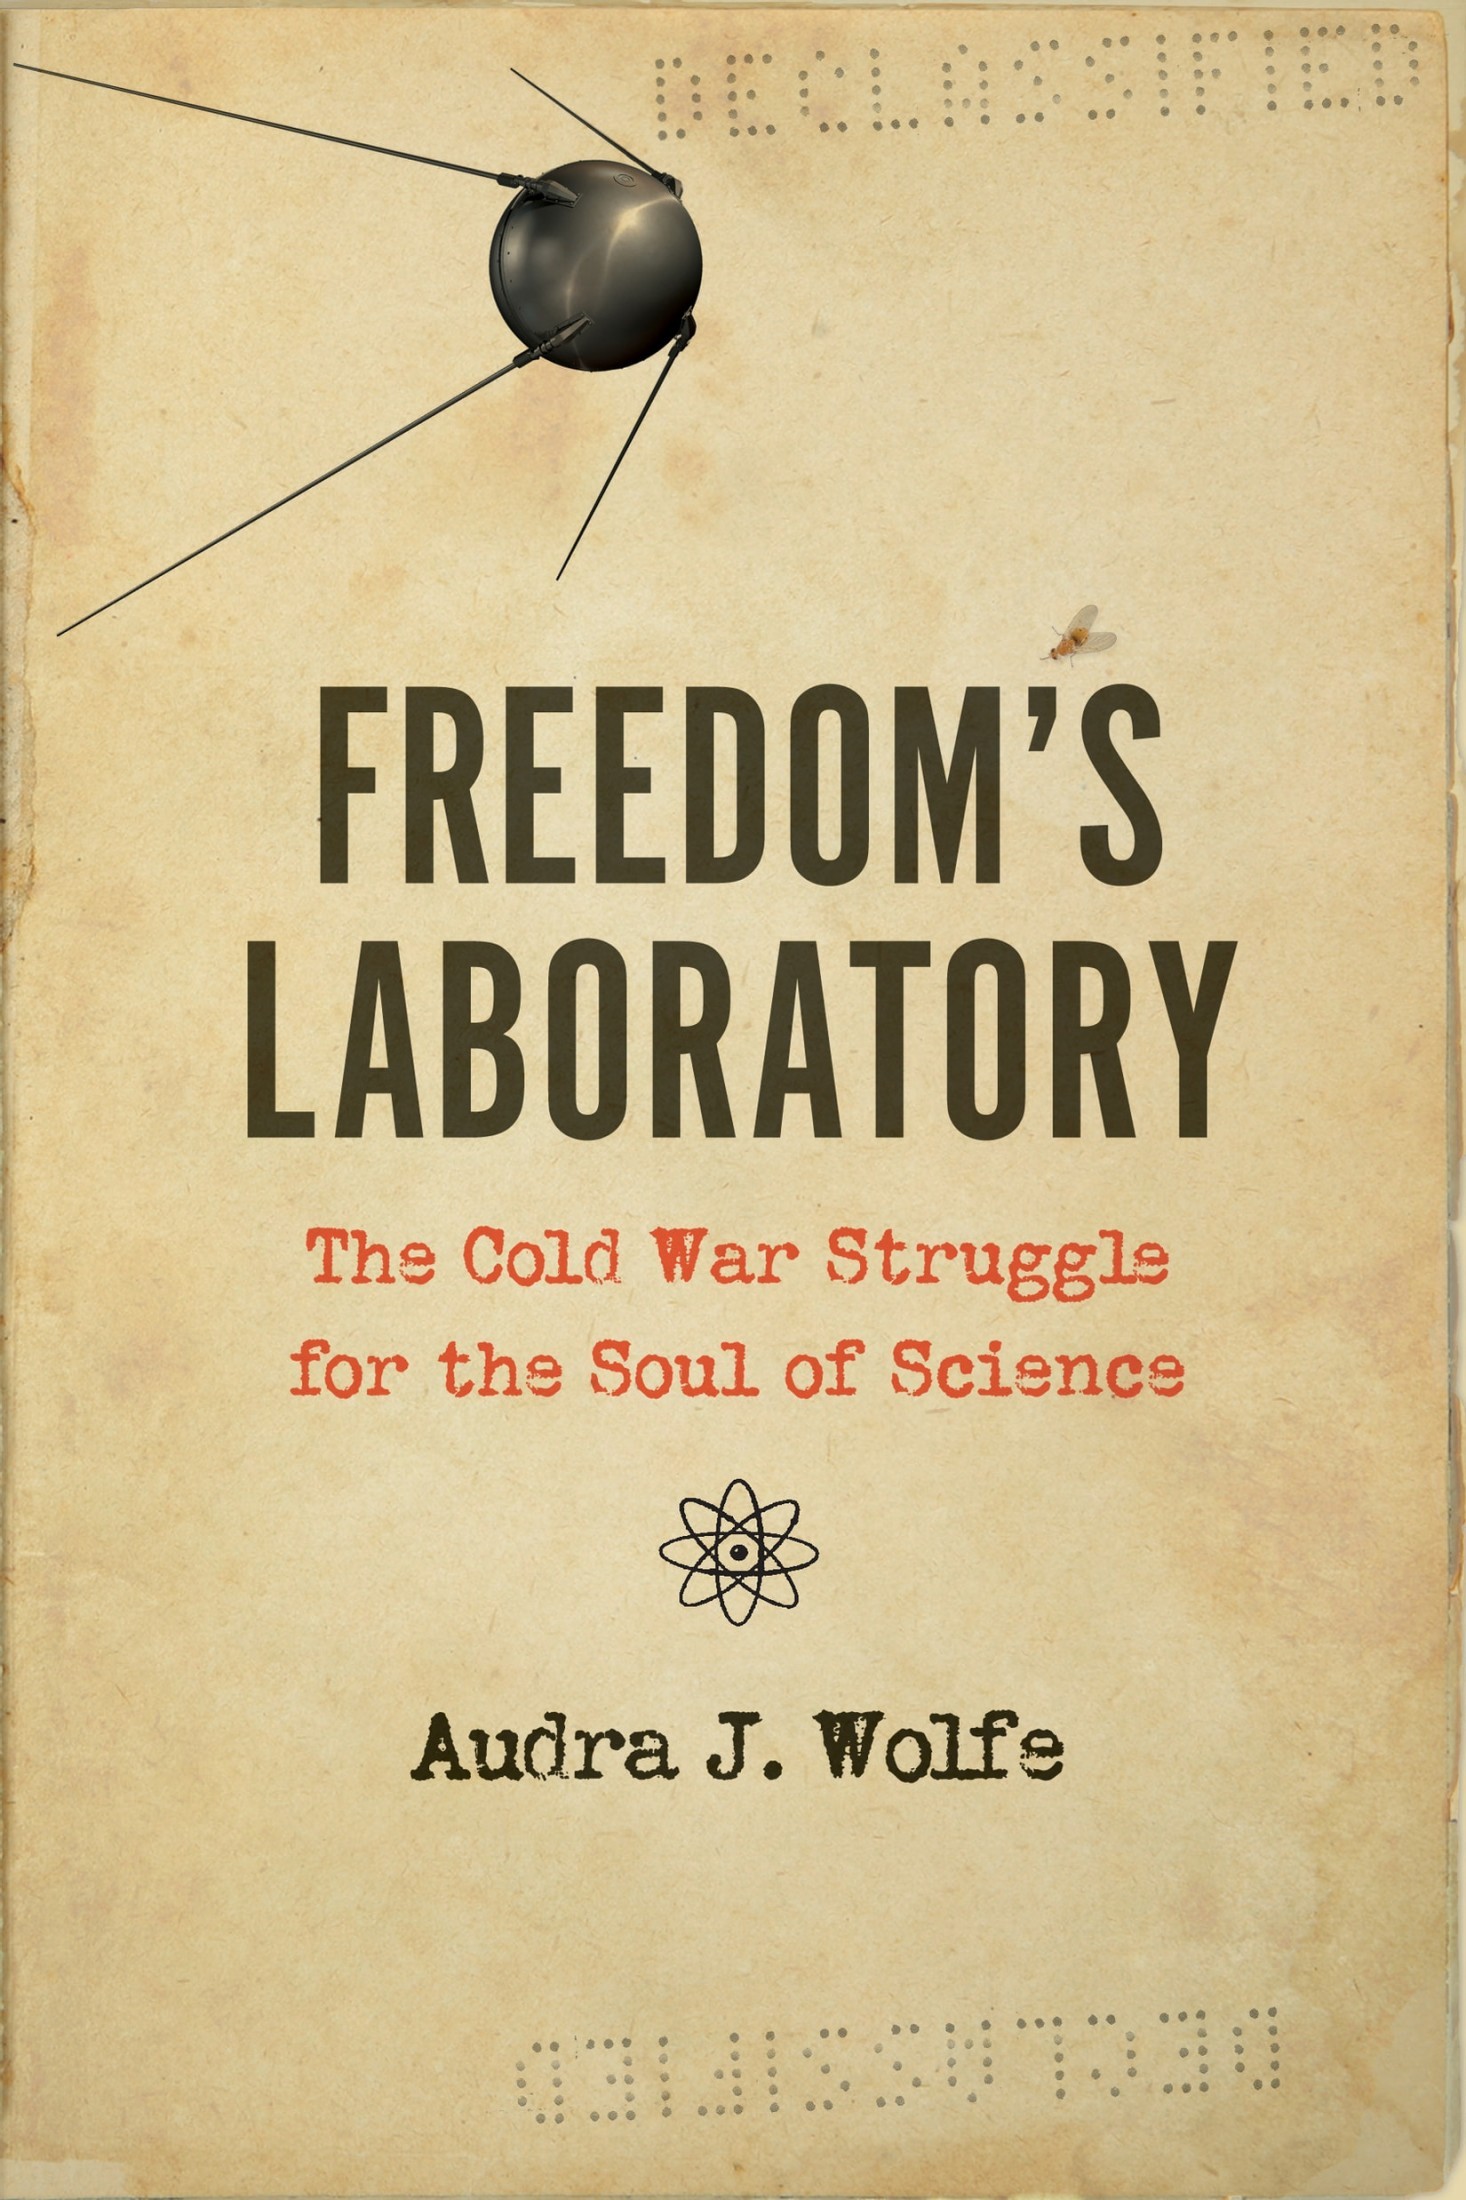 Freedom's Laboratory: The Cold War Struggle for the Soul of Science